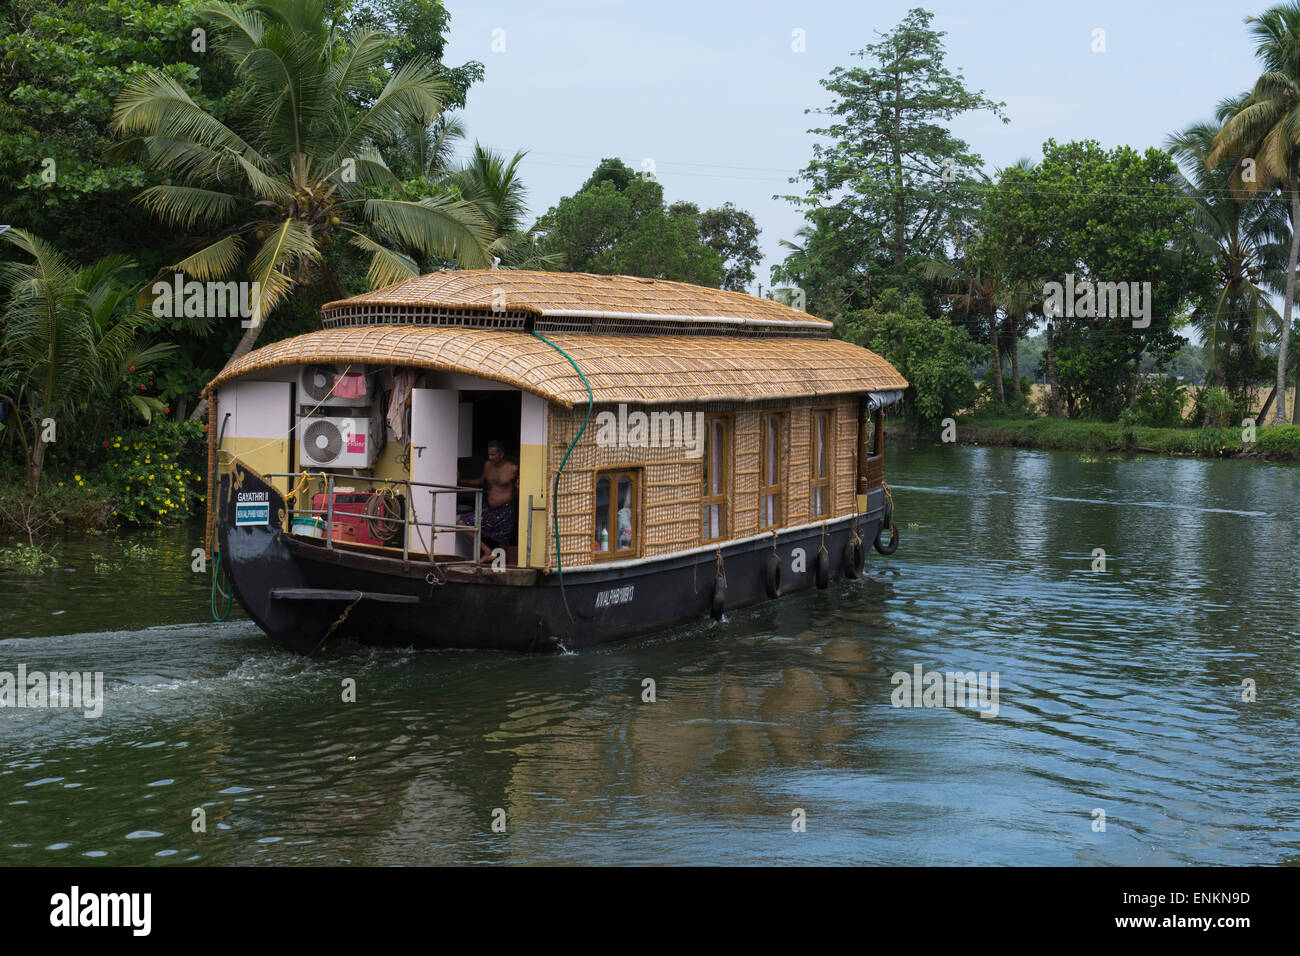 India, Kerala, Alleppey. Backwater canals of Kerala in the area of Kumarakom, known as the 'Venice of the East'. Houseboat. Stock Photo